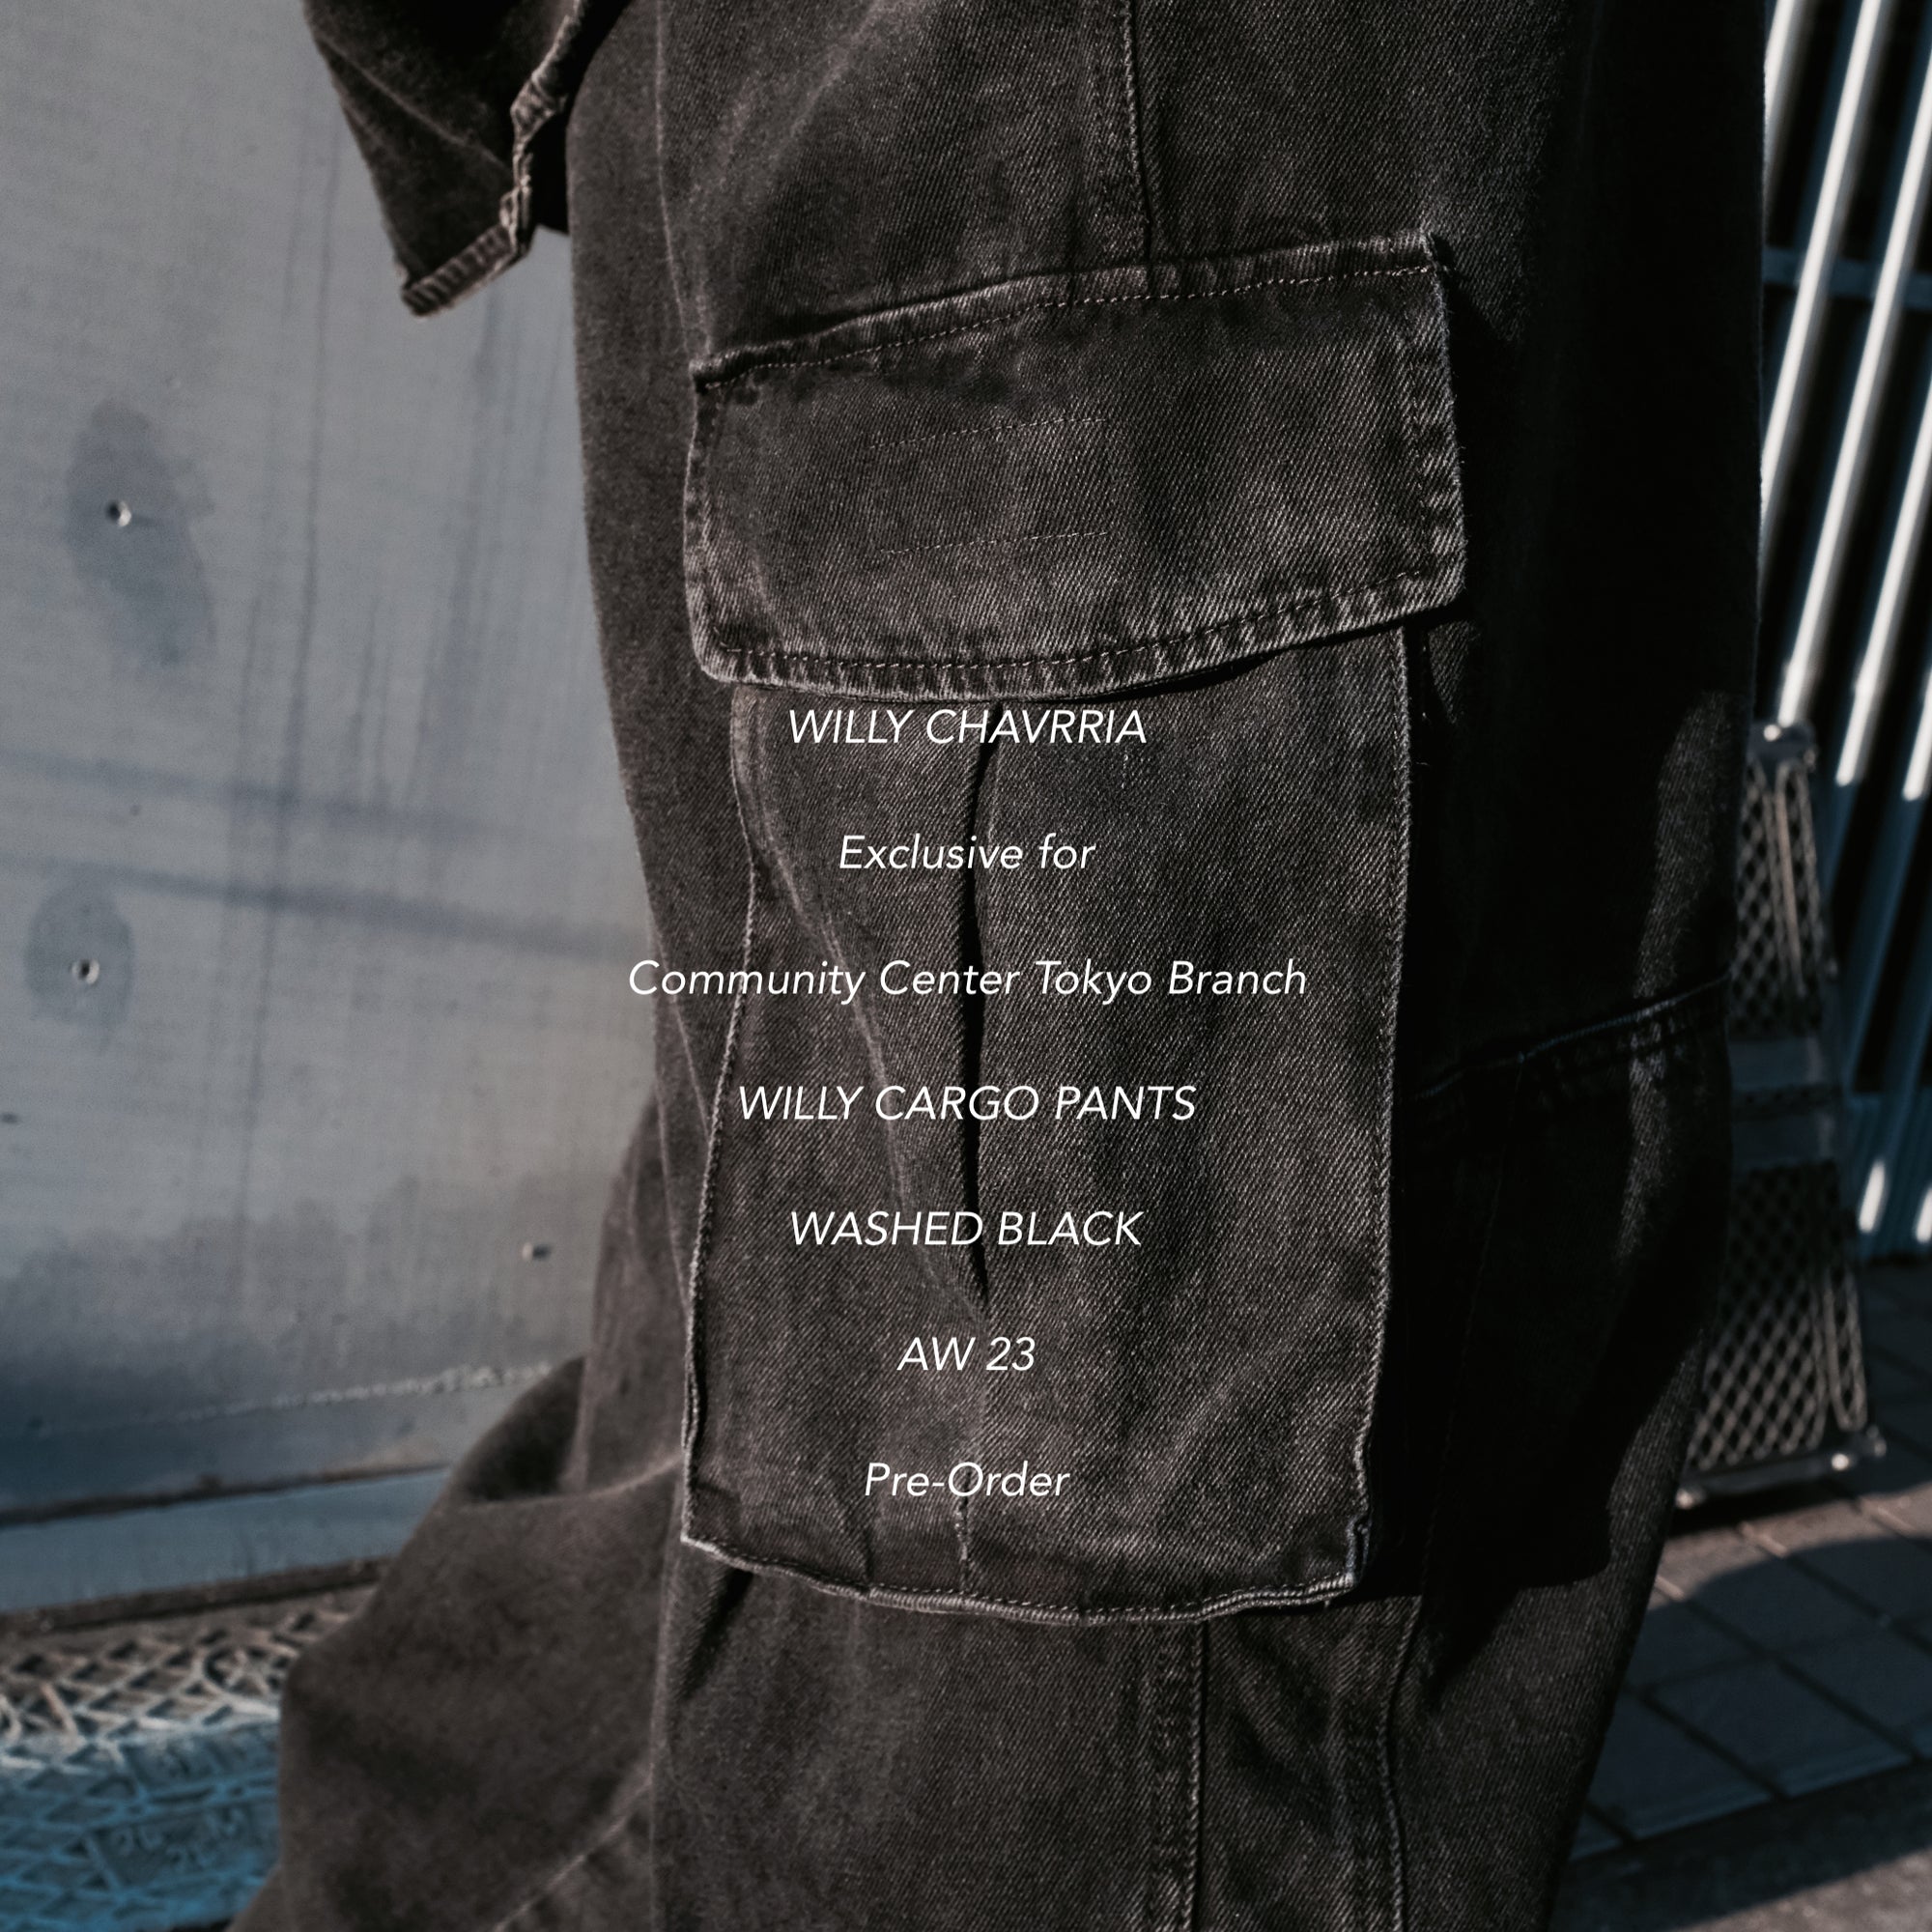 【CCTB Exclusive】WILLY CHAVARRIA / WILLY CARGO PANTS WASHED BLACK